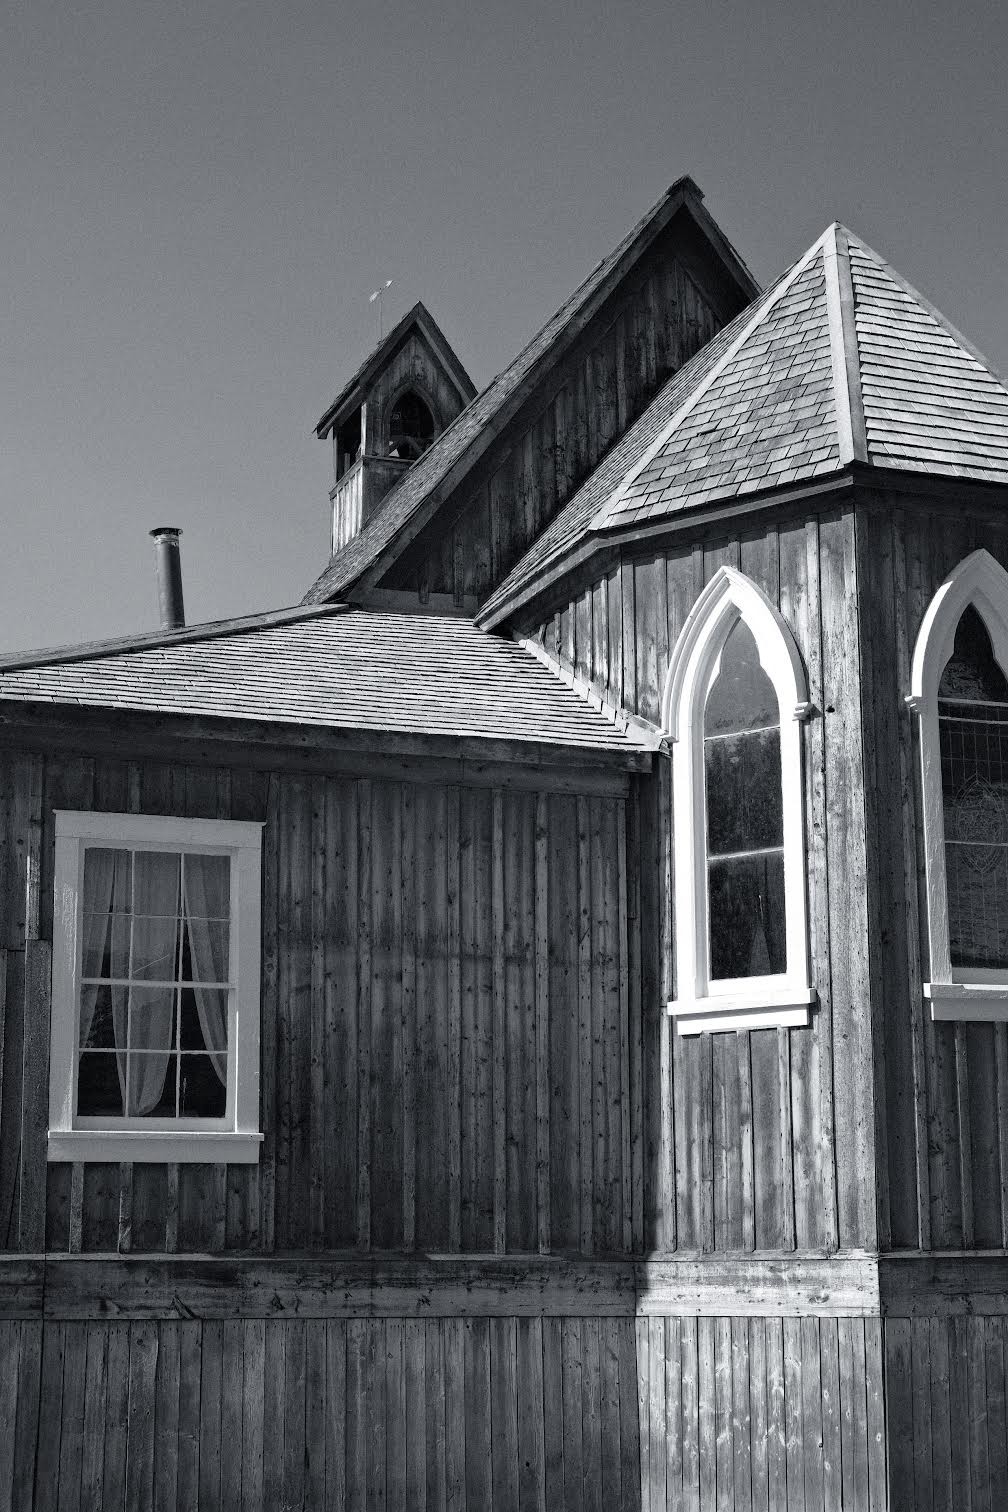 Black and white photo of exterior details of an antique wooden church. Visible are the exterior of the nave, apse and steeple with stained glass windows and sloped rooflines against a cloudless sky.